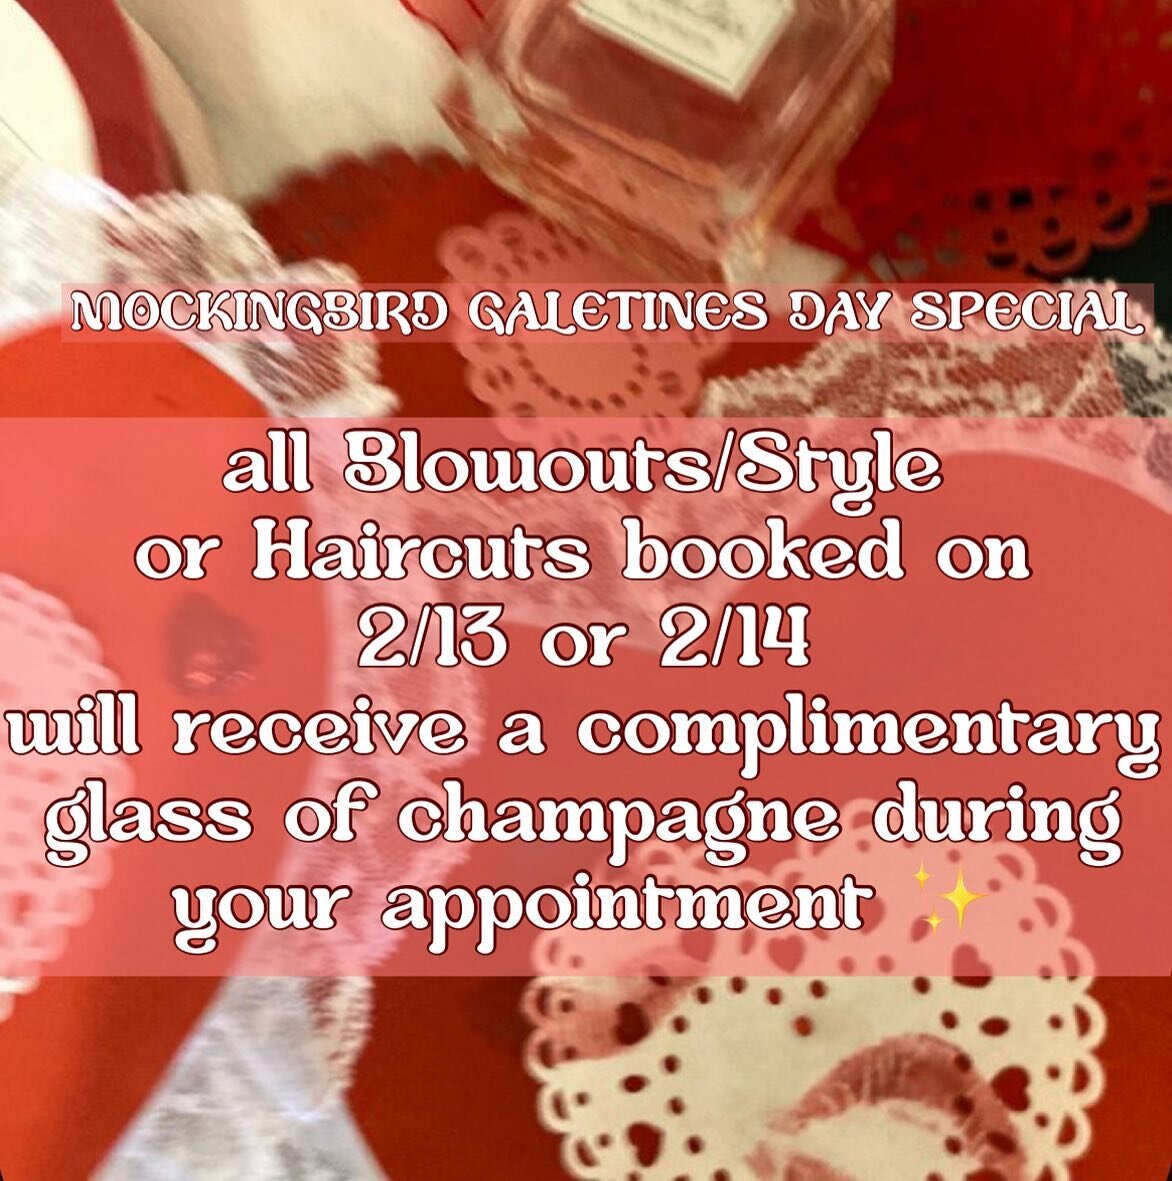 ♡
♡ MOCKINGBIRD GALENTINES DAY♡
book a blowout or haircut on 2/13 or 2/14 and receive a complimentary glass of champagne during your appointment!! link in bio to book🎀💕💐
-
-
#phillyhairsalon #cleanhairproducts #veganhairproducts #nontoxichaircare 